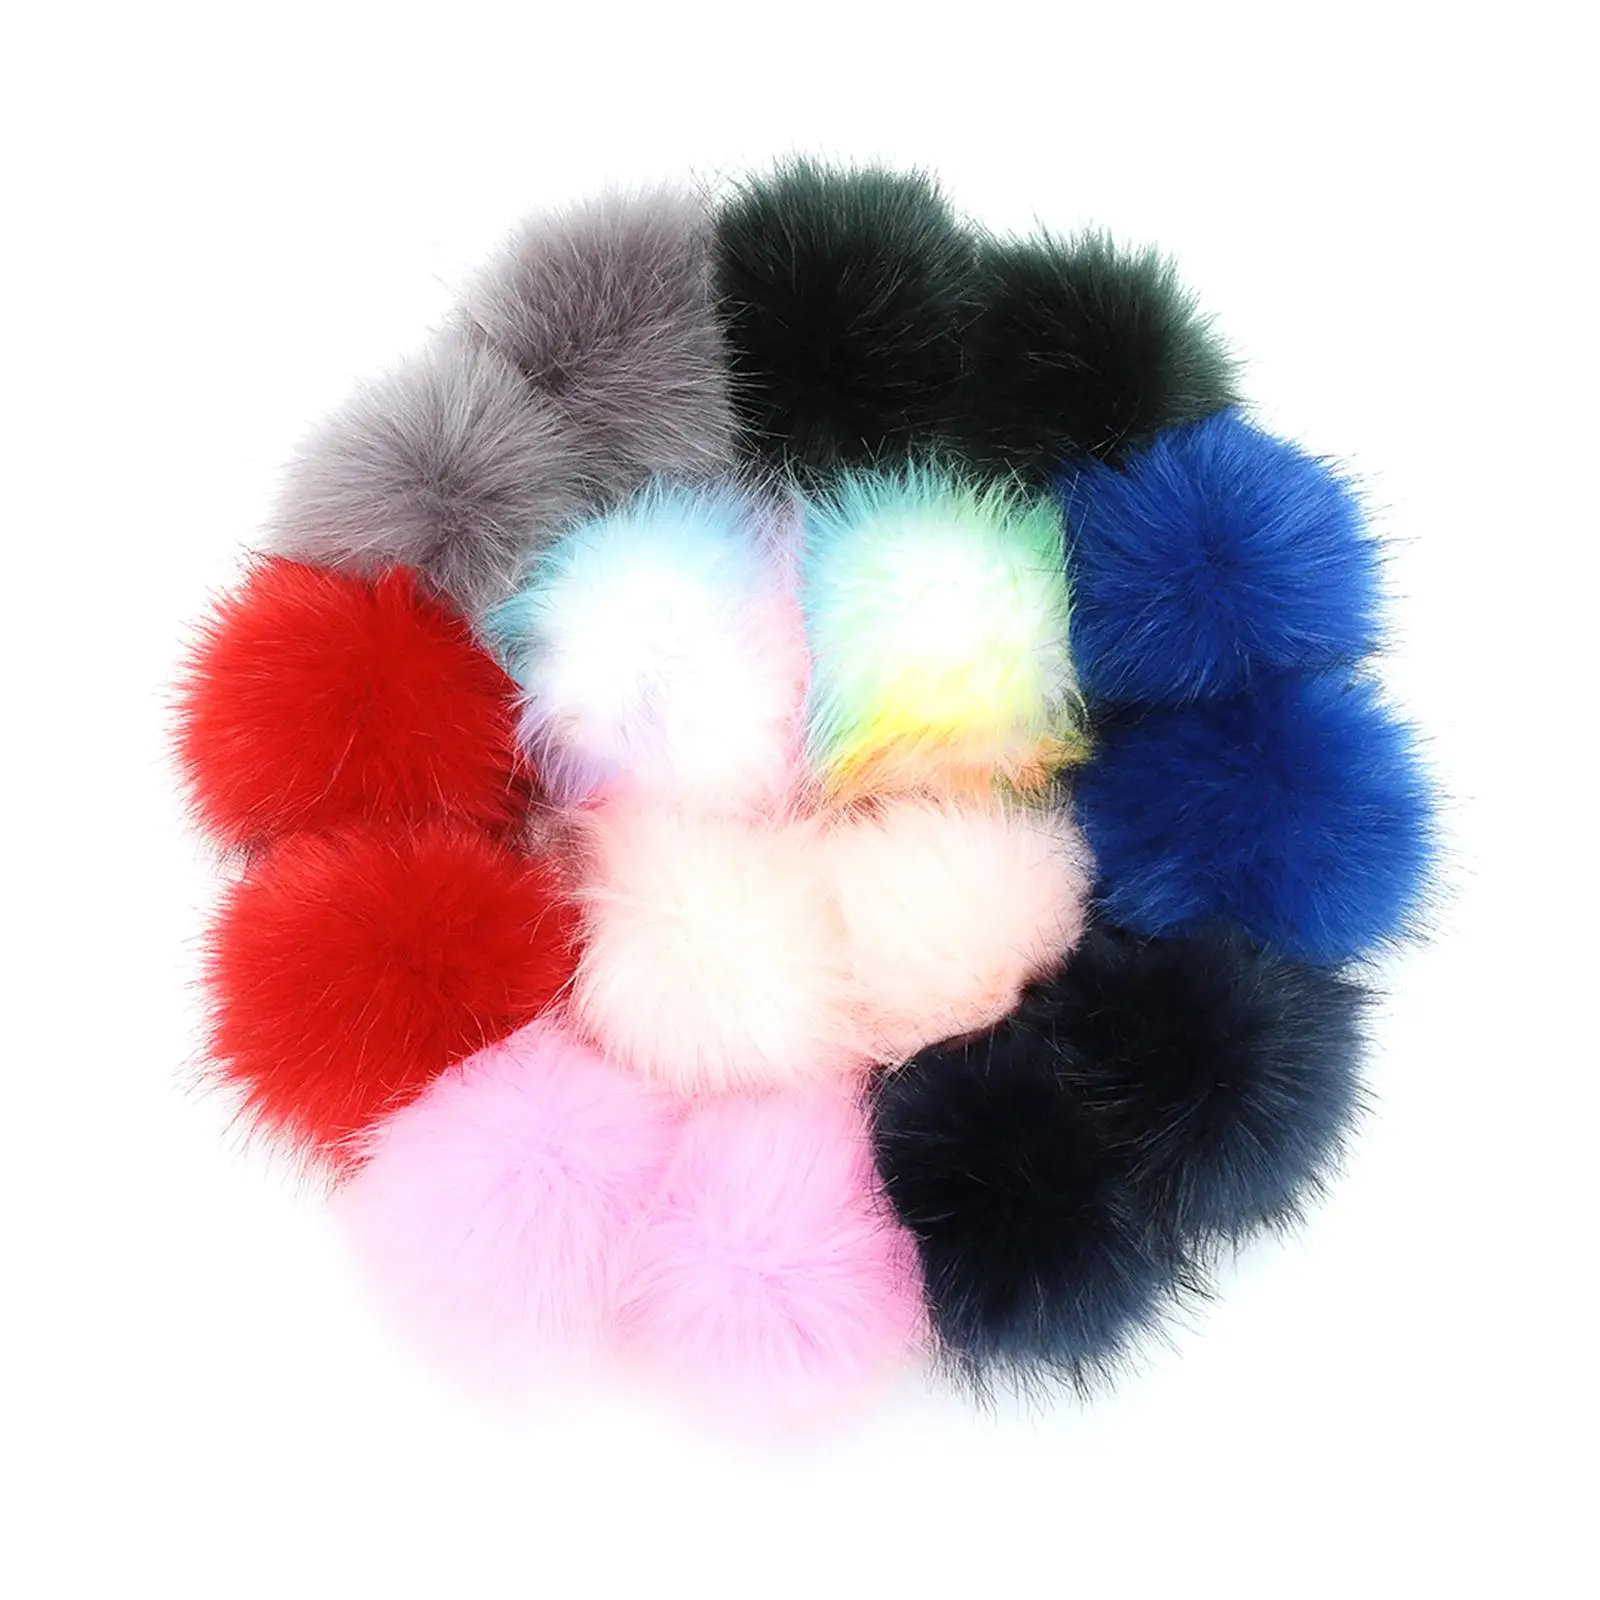 16 Pieces Multicolor Pom Poms Crafting Soft Arts DIY Knitting Beanie Hats Kids Toy Assorted for Clothing Handmade Decorations